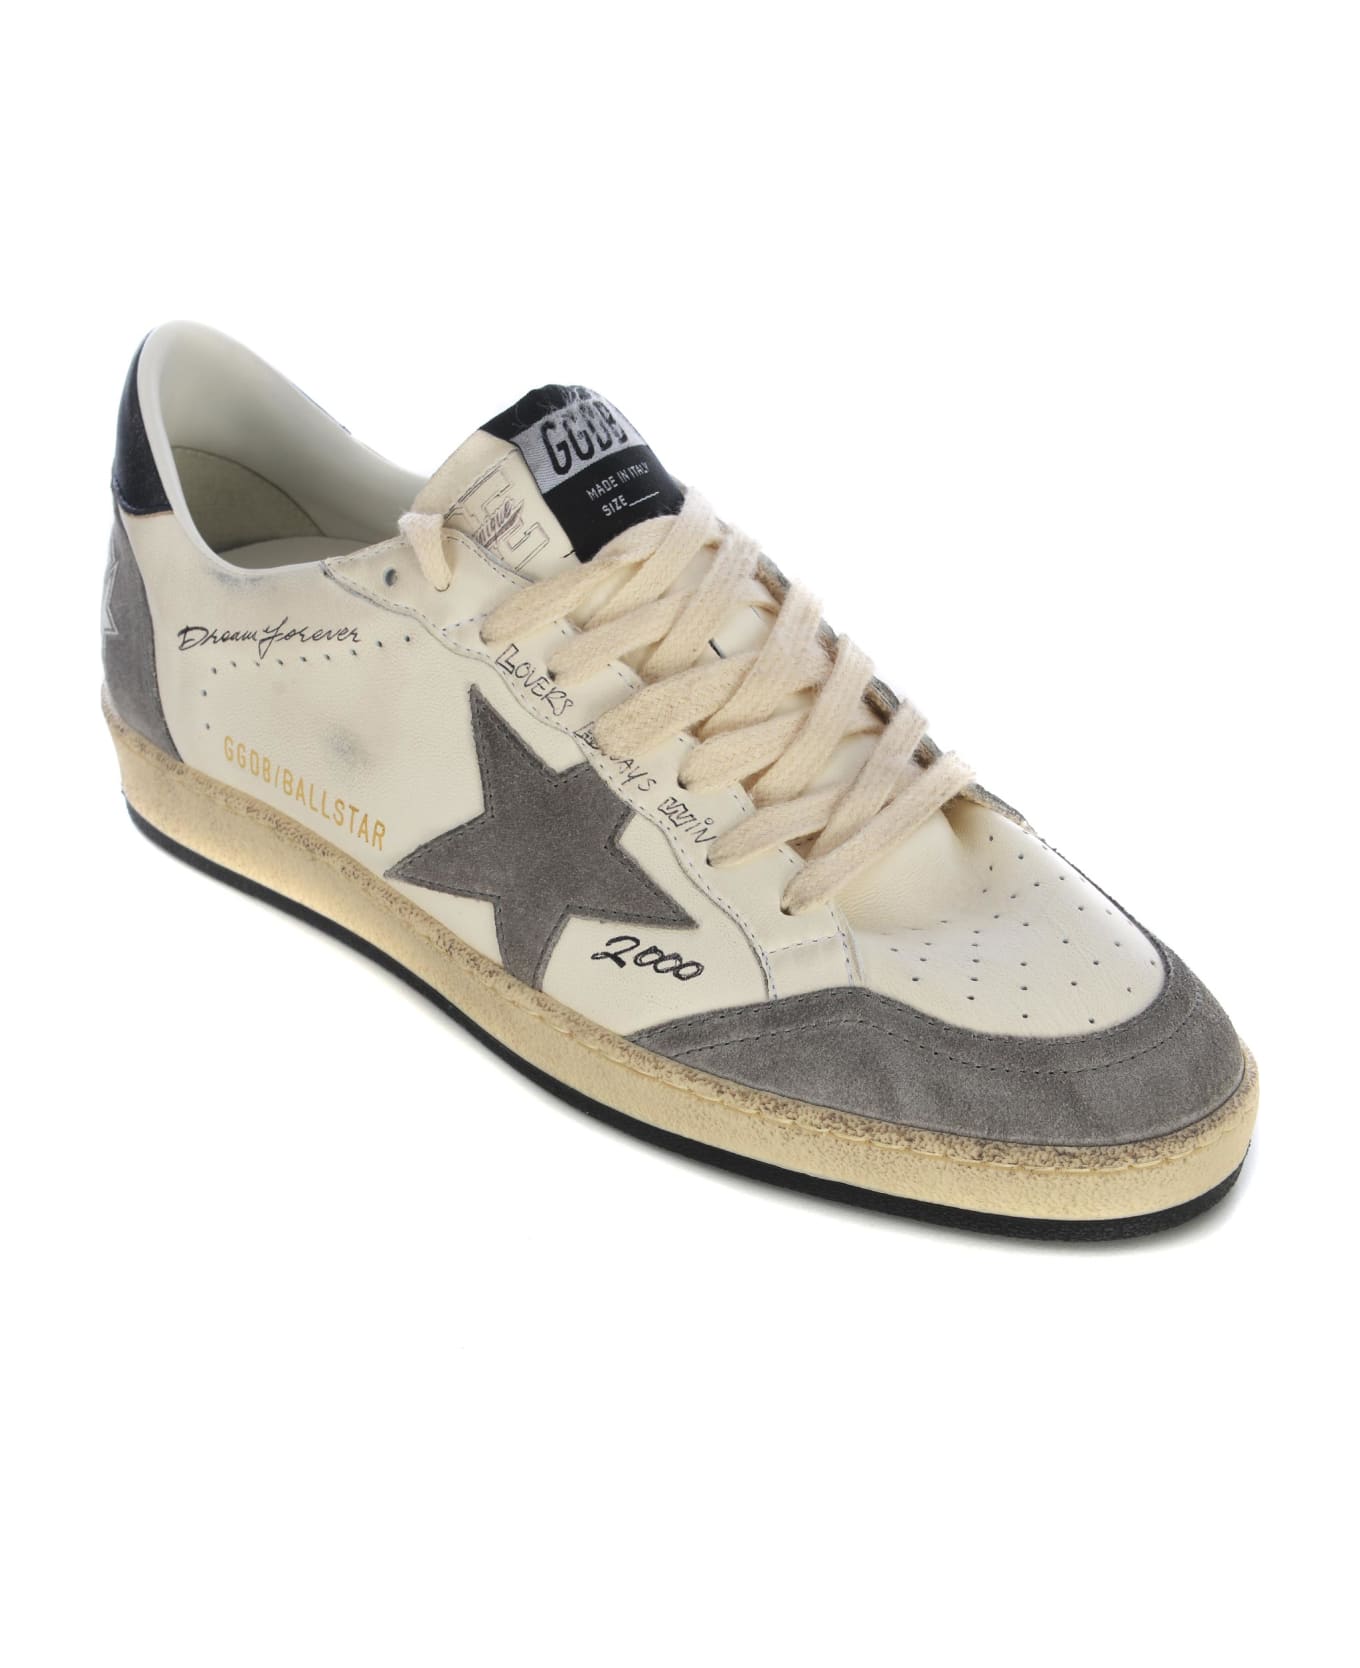 Golden Goose Sneakers Golden Goose "ball Star" Made Of Leather - Bianco grigio